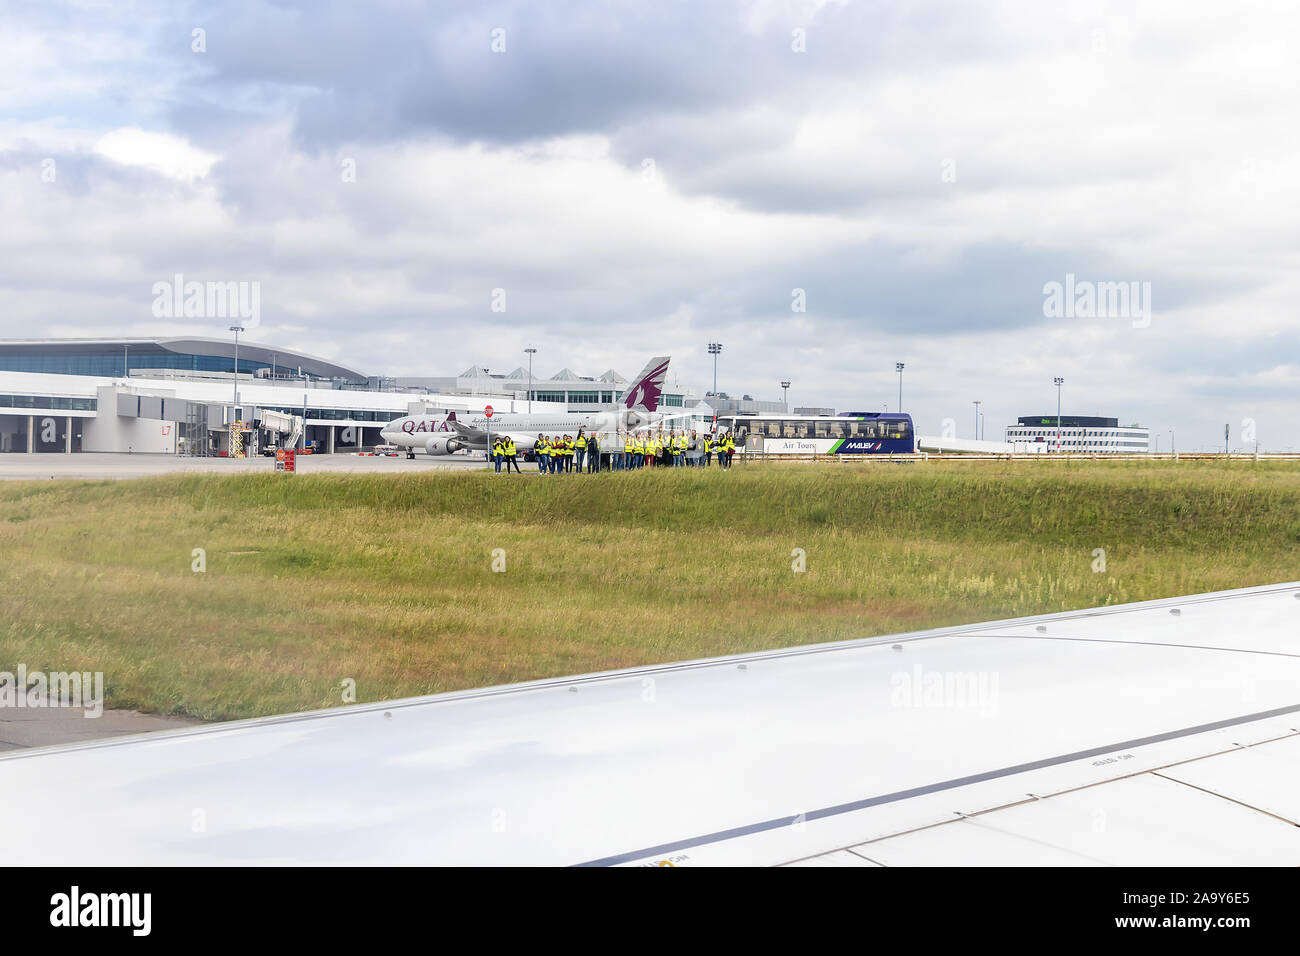 Budapest, Hungary - May 23, 2019 : View from passenger seat of a plane taxiing at Budapest airport Stock Photo